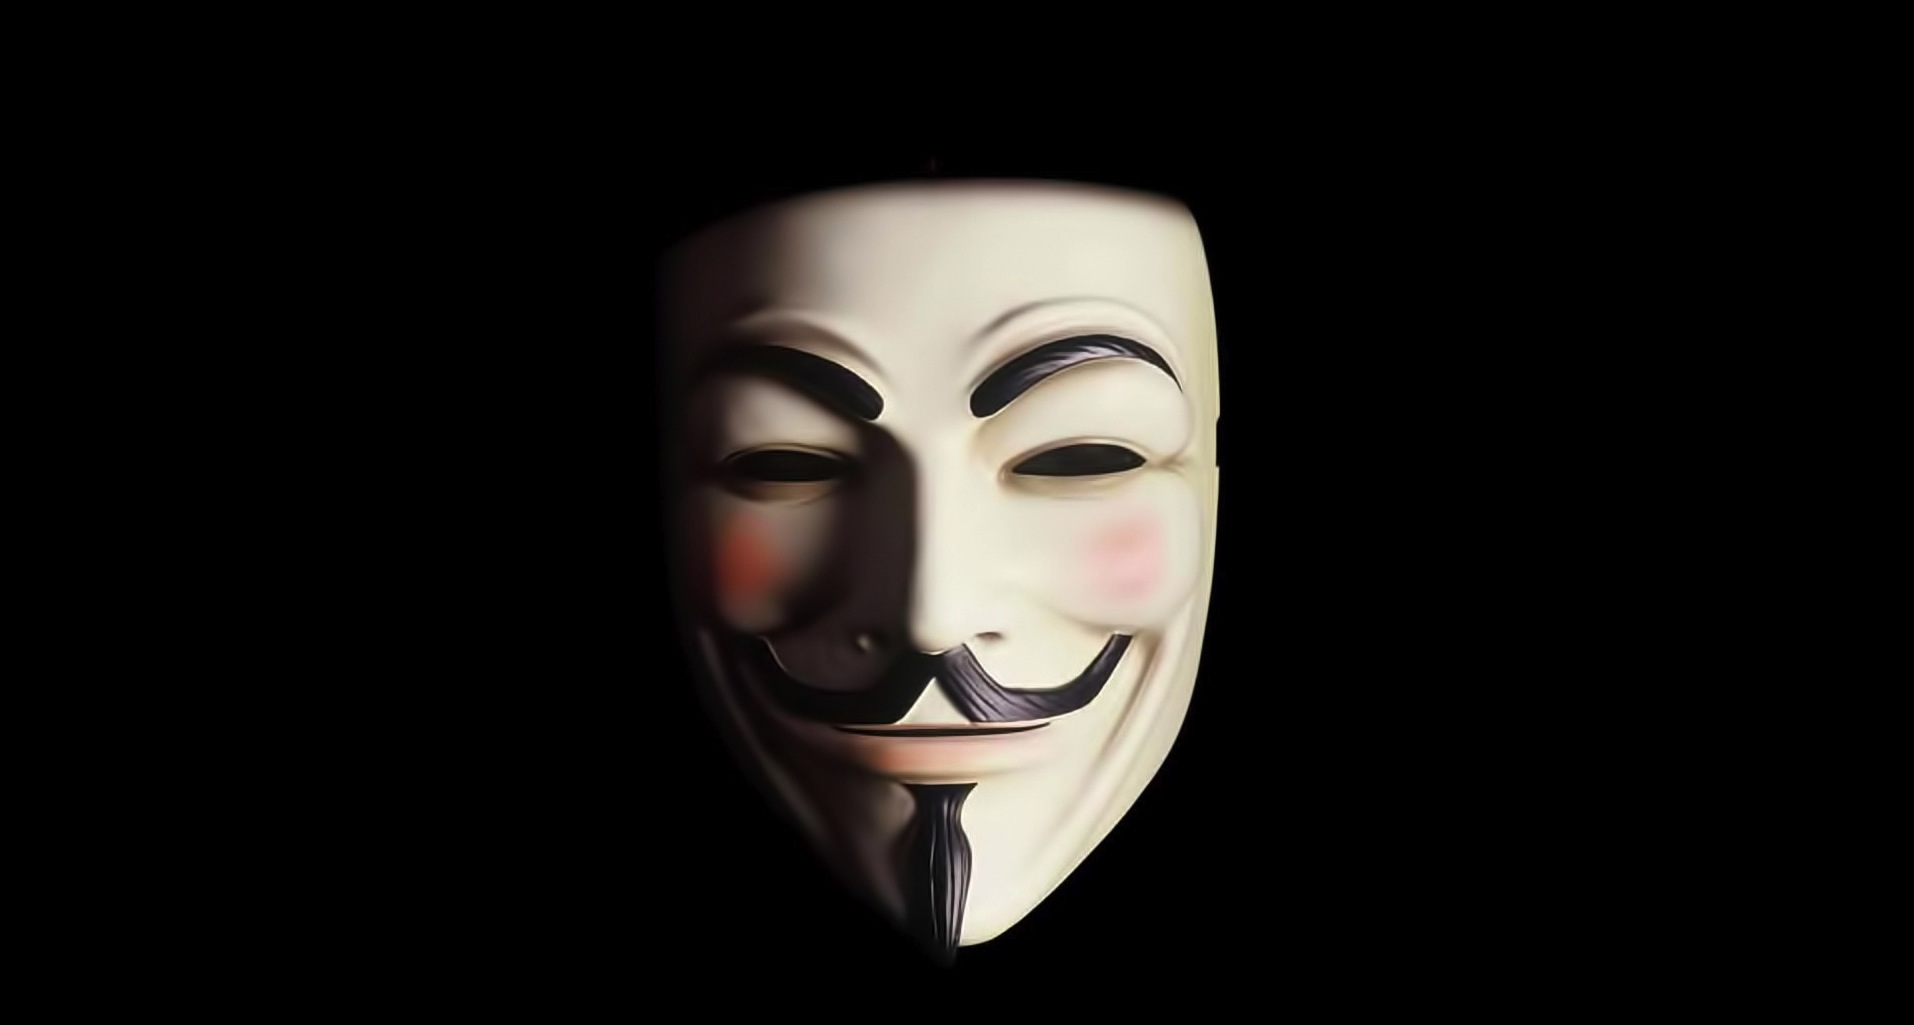 Guy Fawkes, by Anonymus-ng